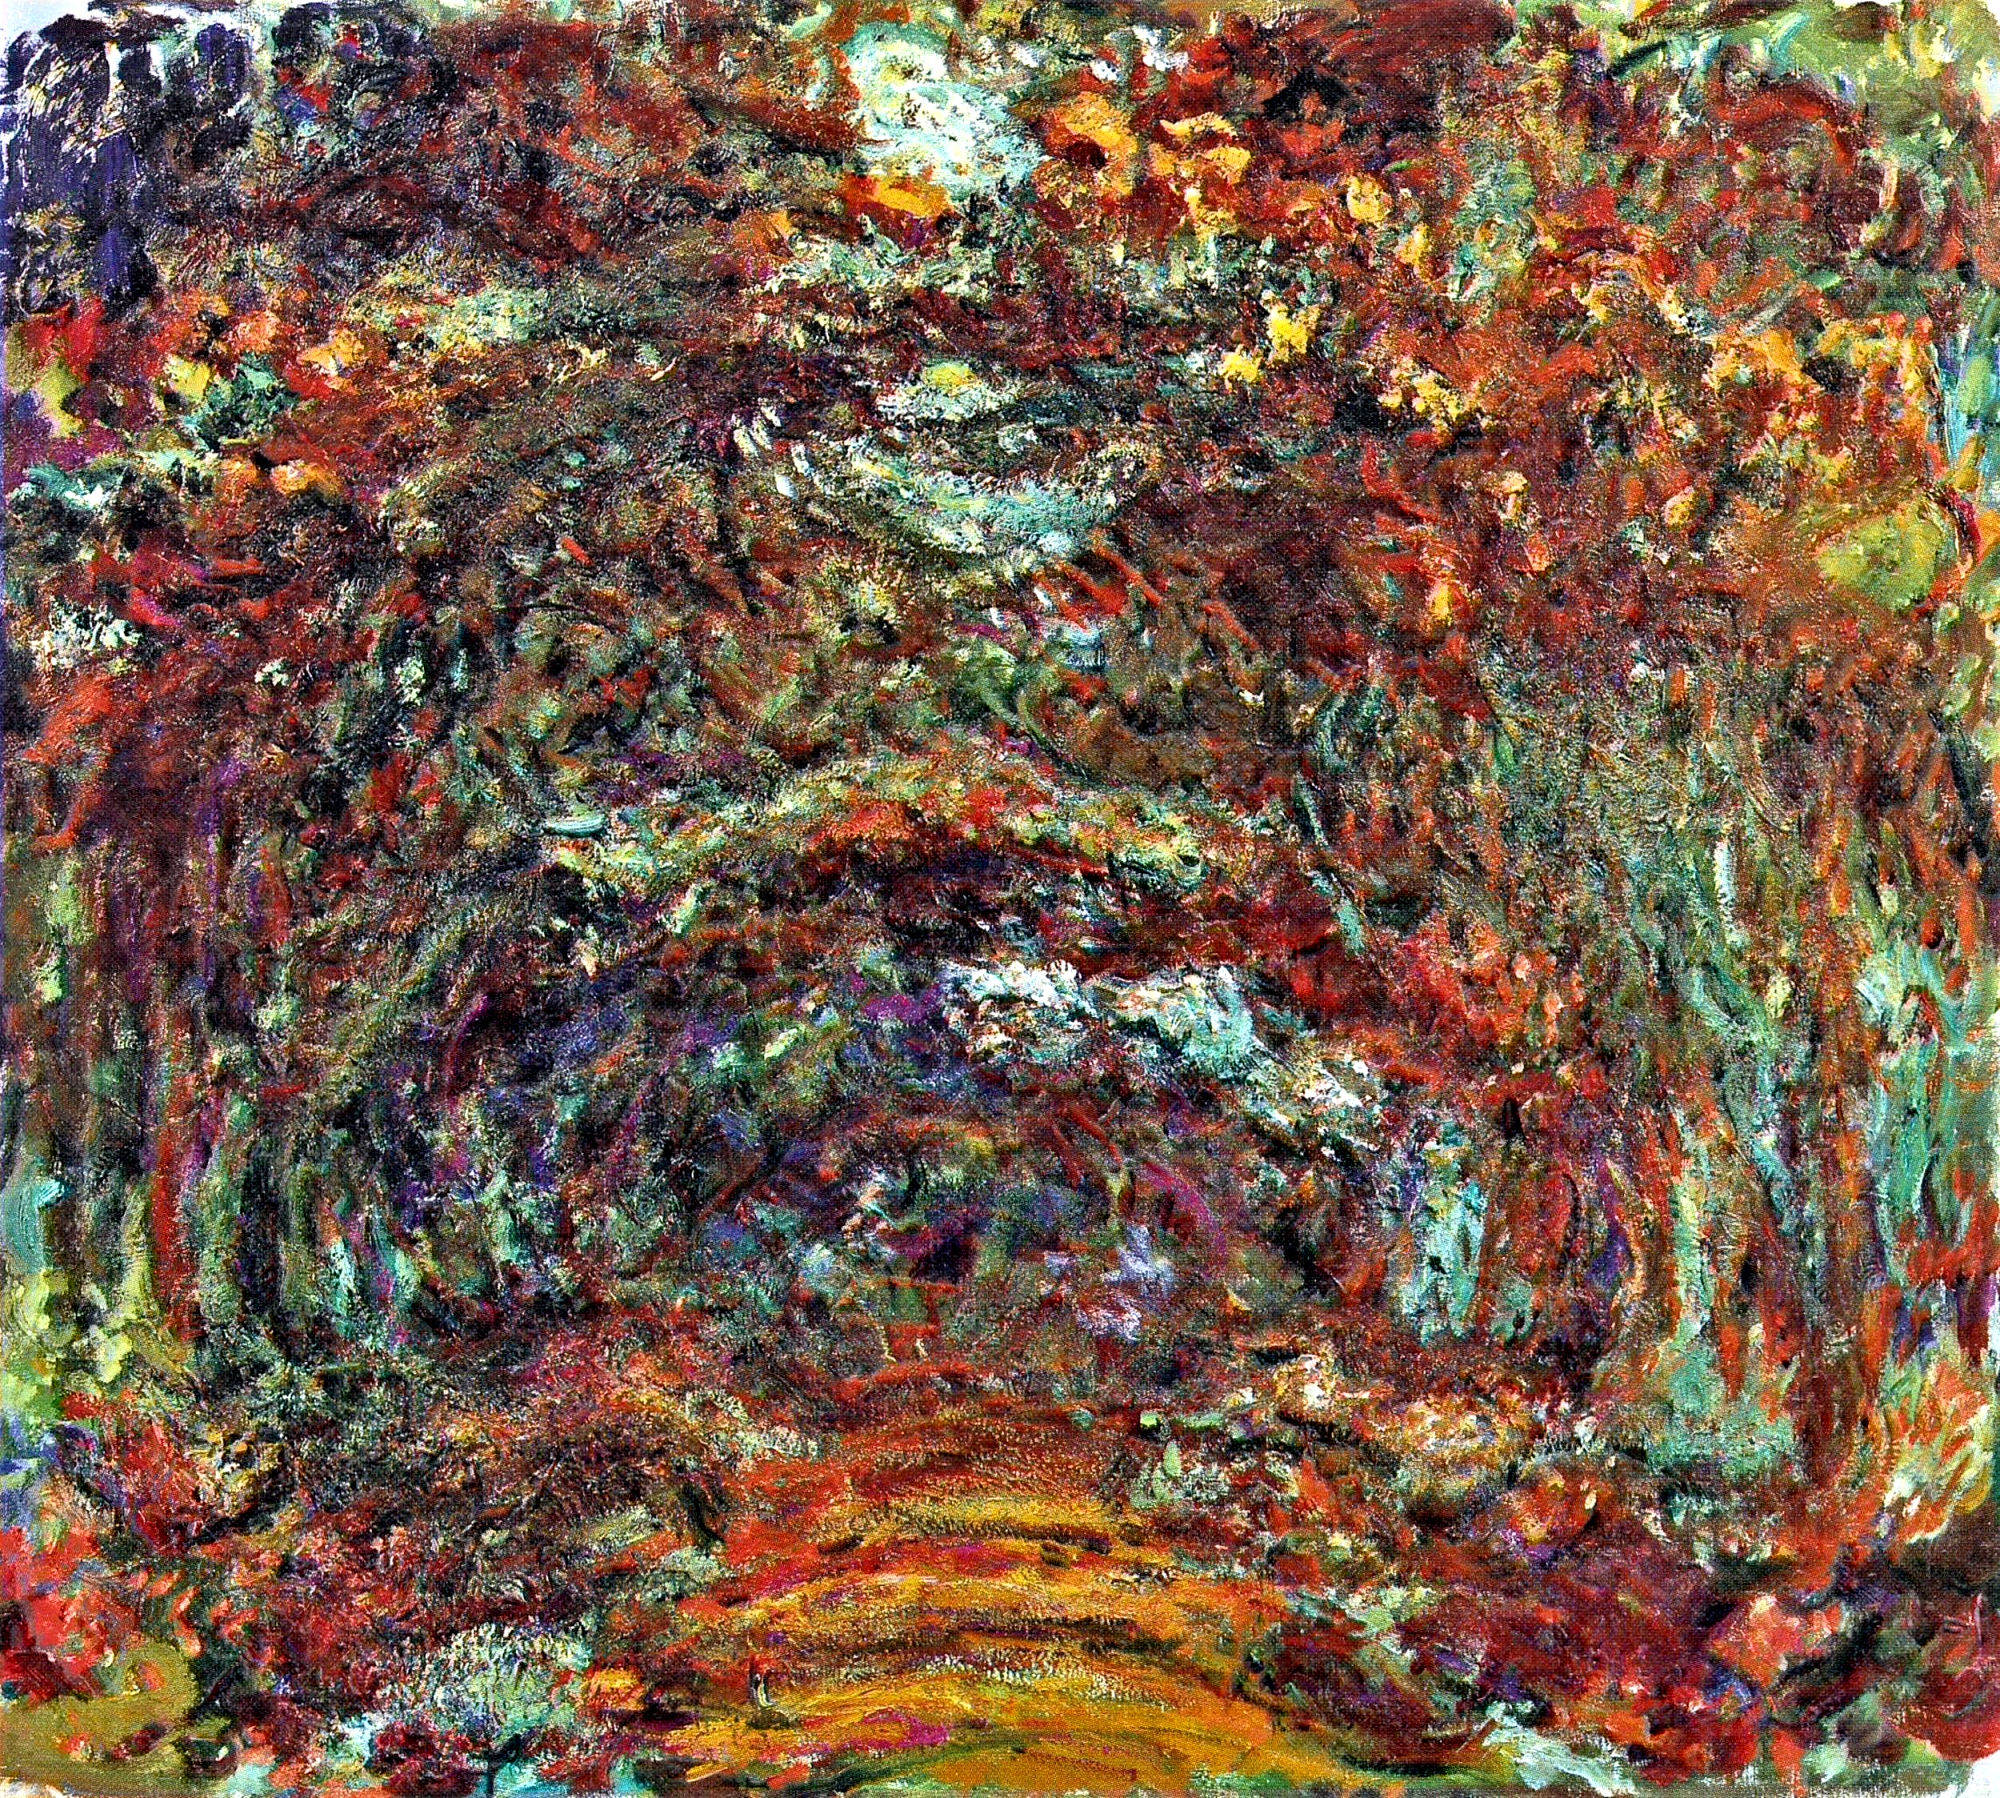 The Rose Path, Giverny - Claude Monet - WikiArt.org - encyclopedia of